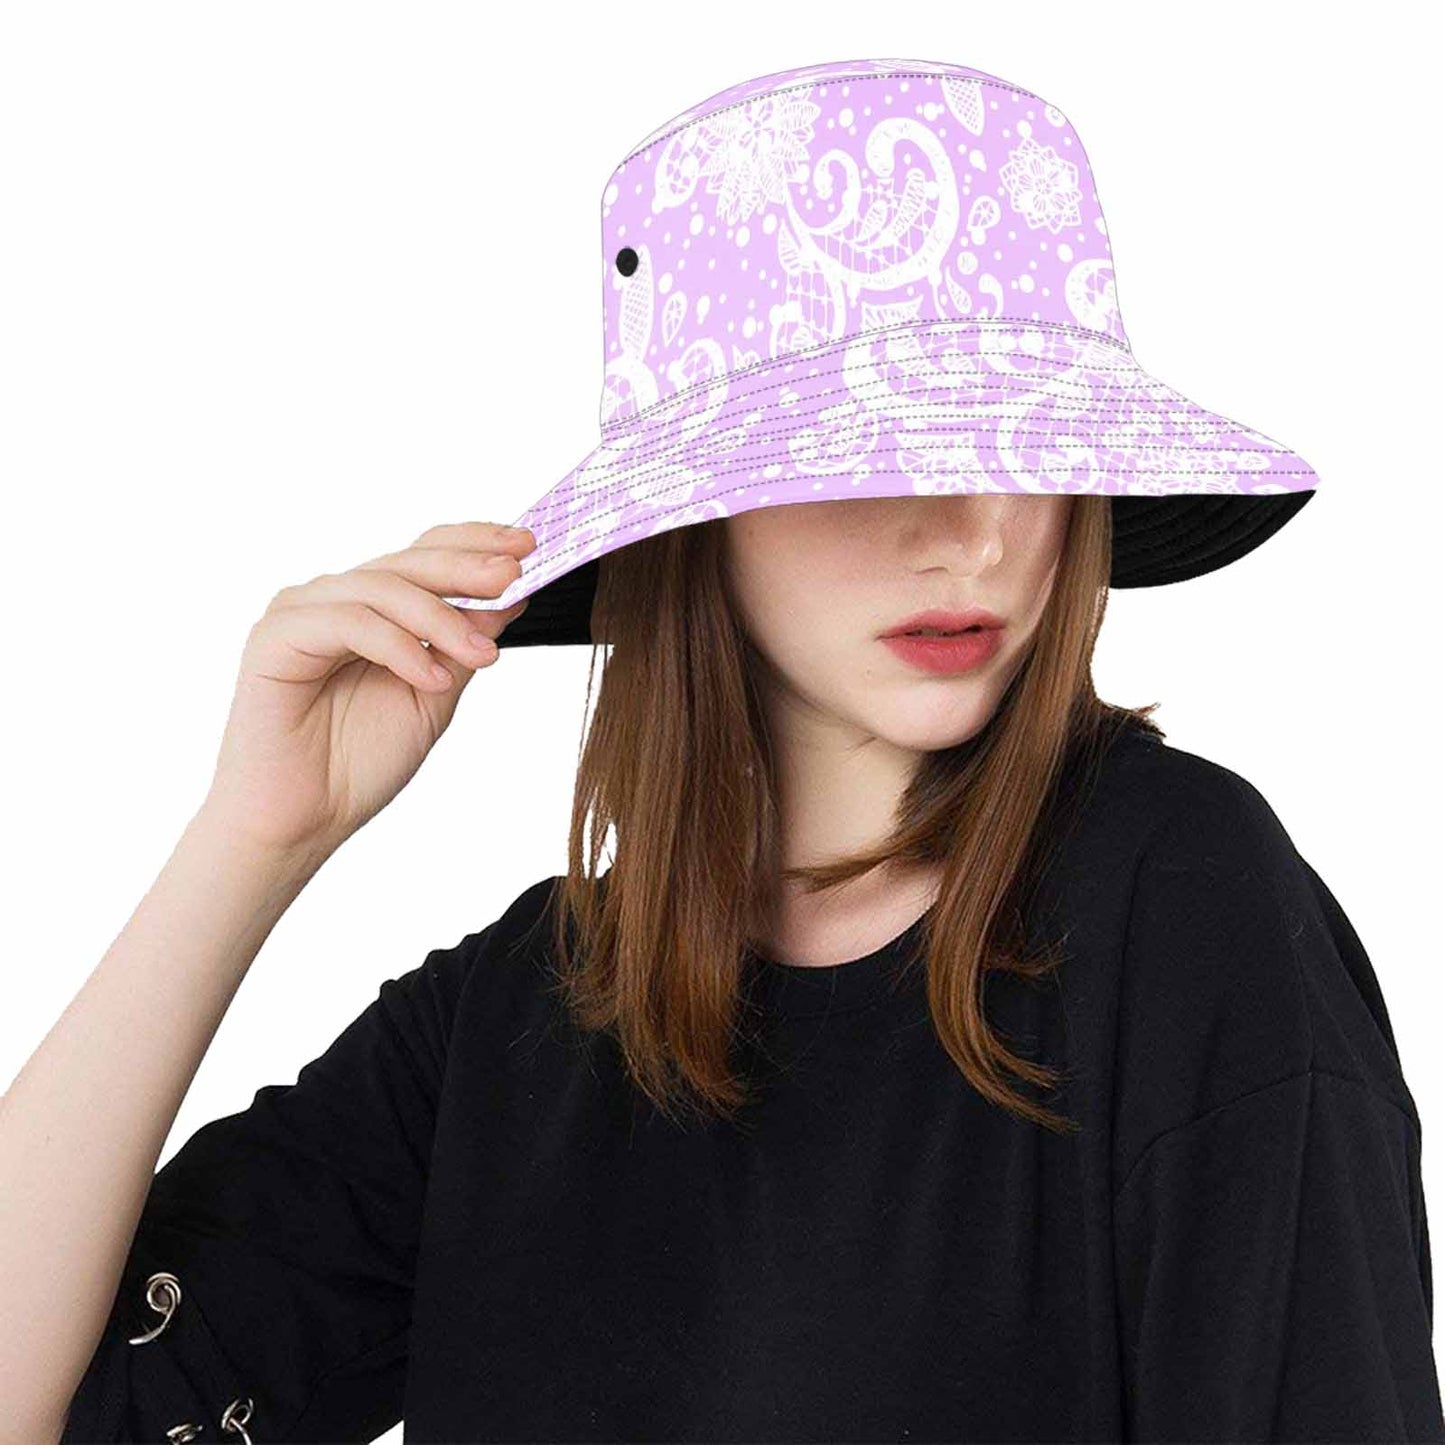 Victorian lace Bucket Hat, outdoors hat, design 06